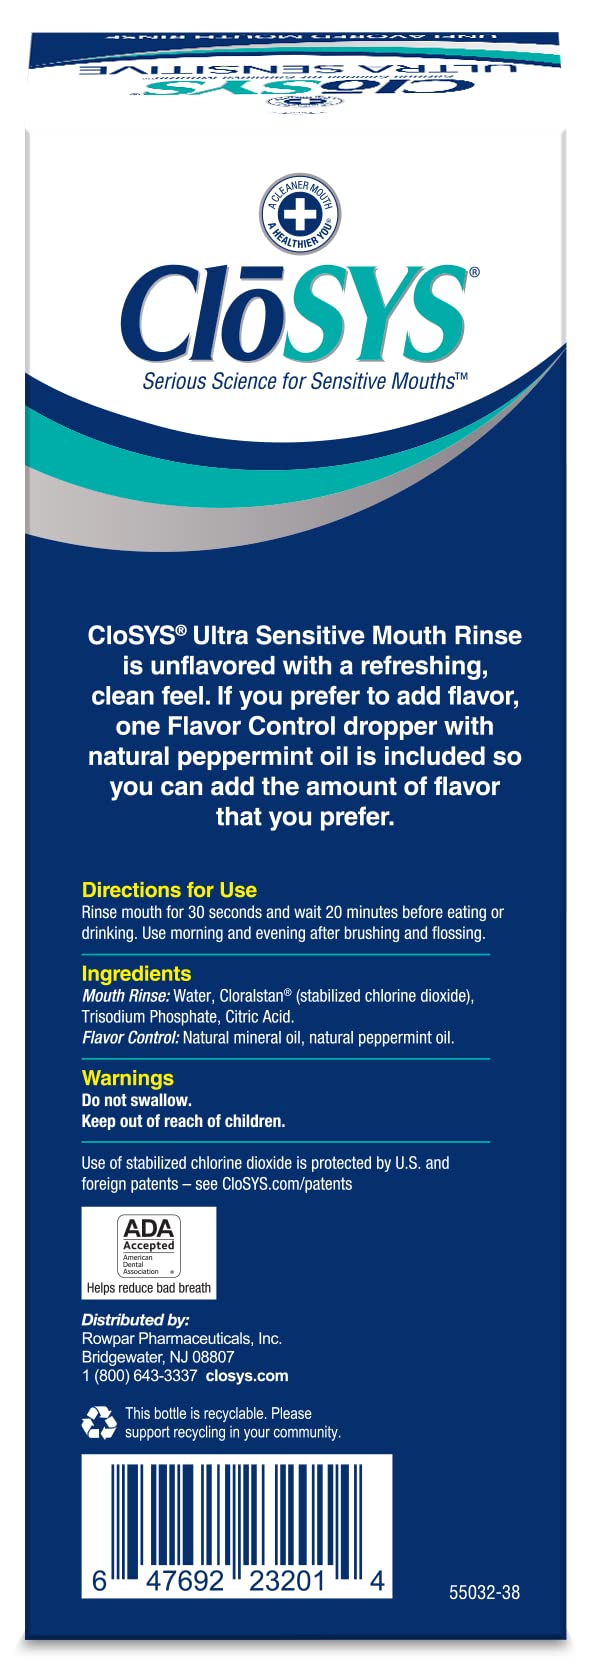 CloSYS Ultra Sensitive Mouthwash, 32 Ounce (Pack of 2), Unflavored (Optional Flavor Dropper Included), Alcohol Free, Dye Free, pH Balanced, Helps Soothe Entire Mouth